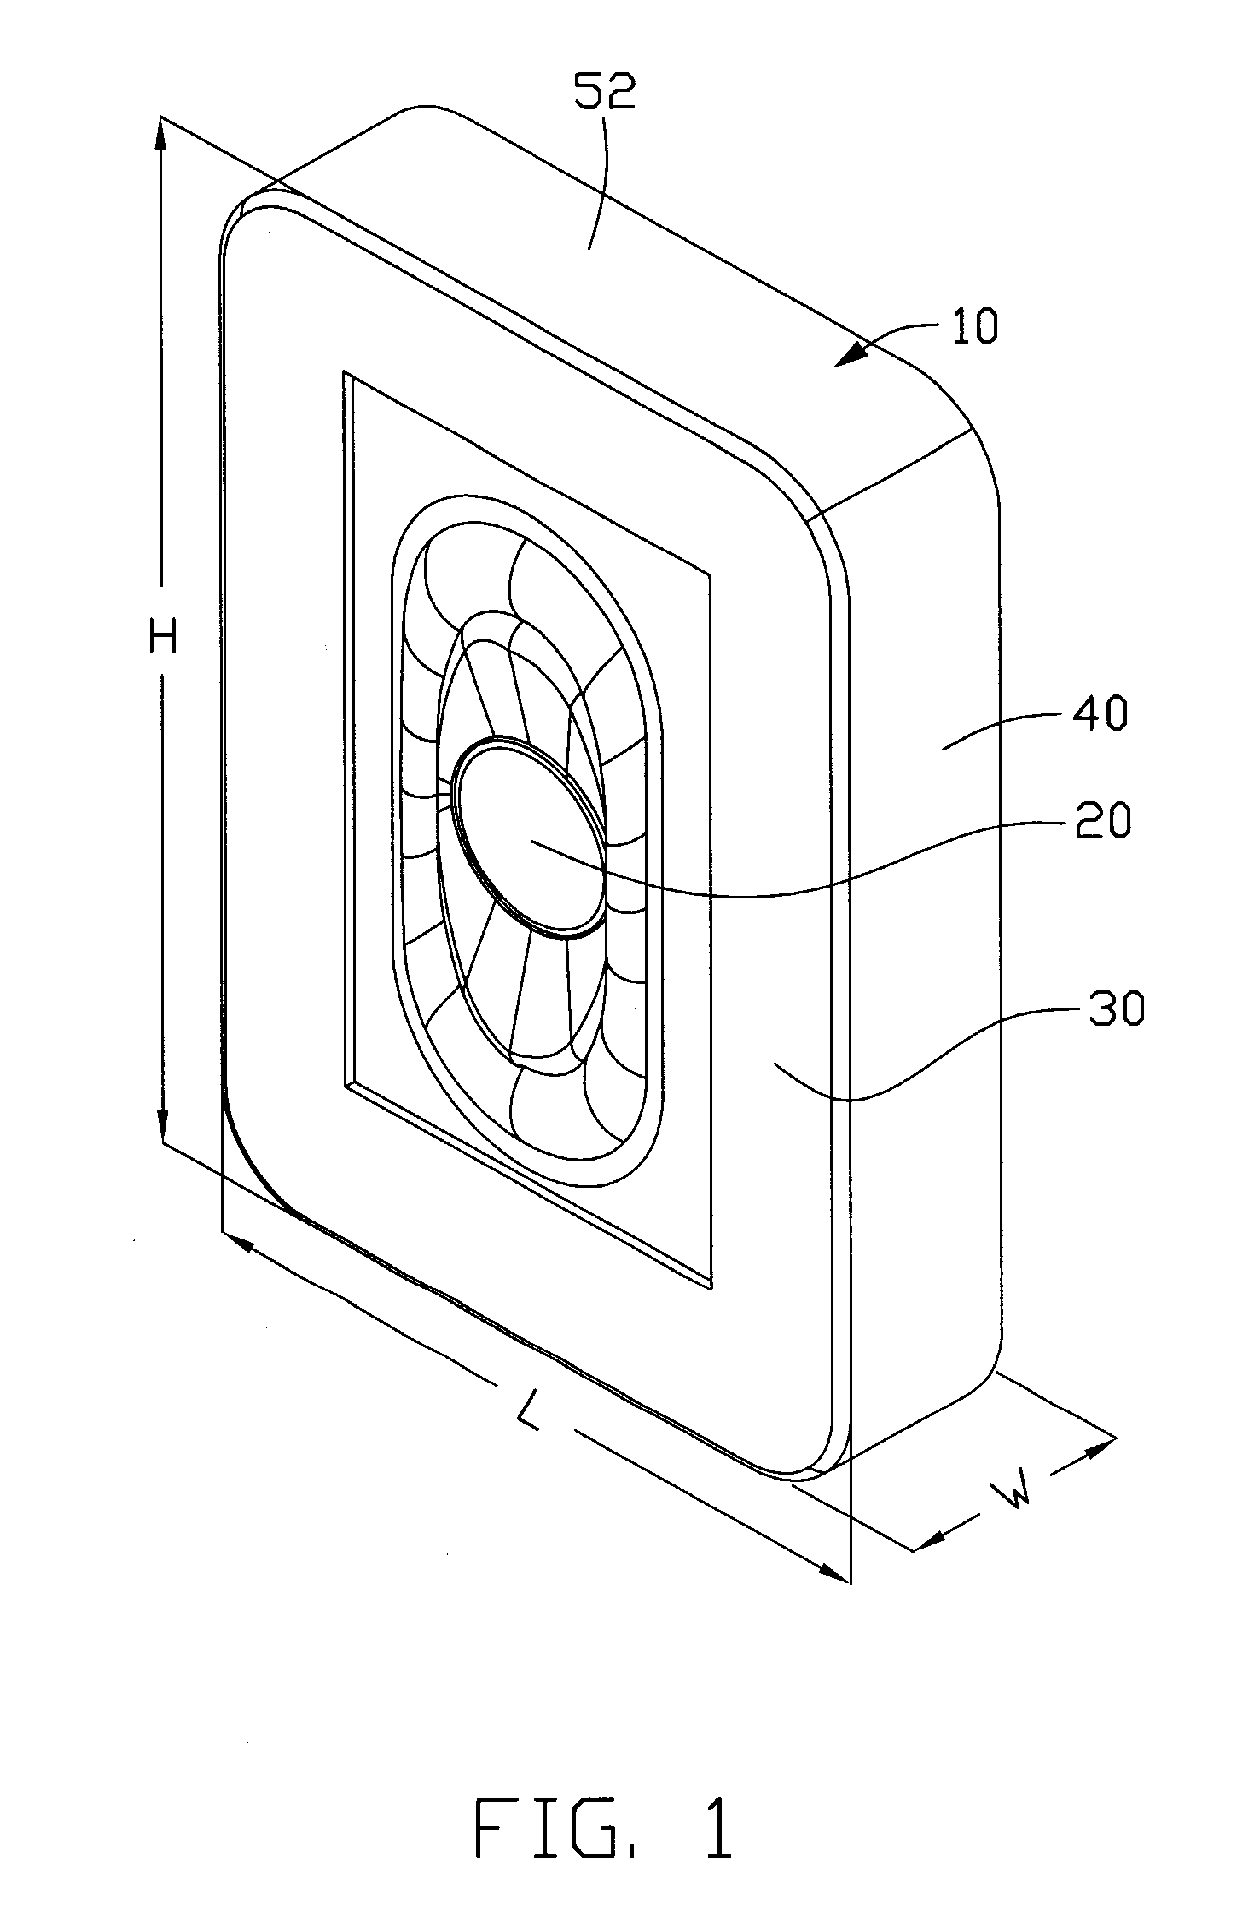 Speaker module with expandable enclosure